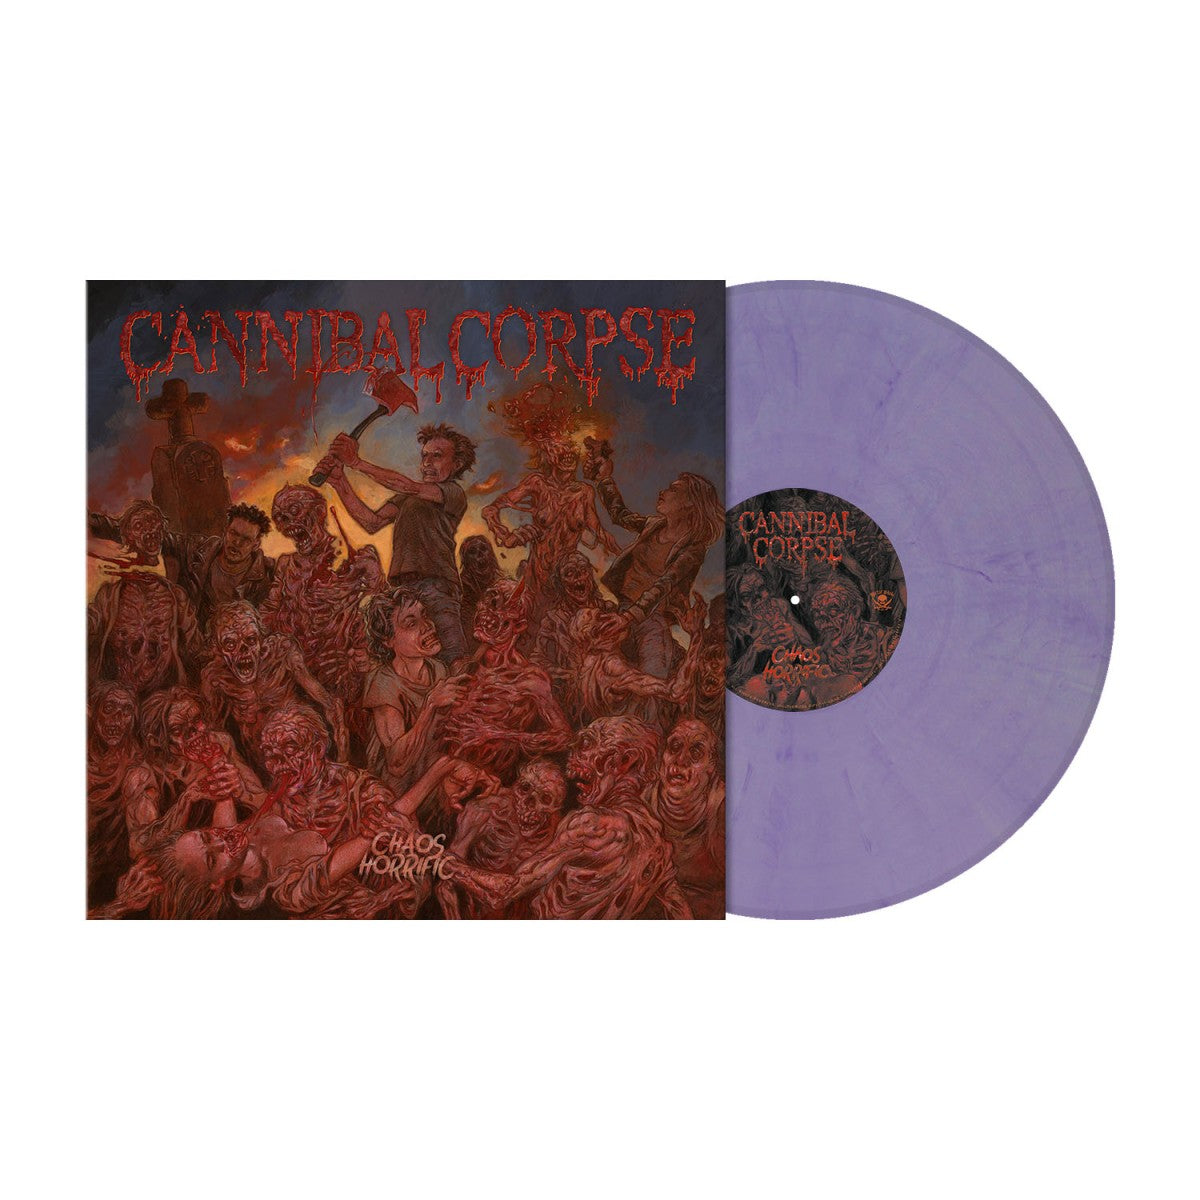 Cannibal Corpse "Chaos Horrific" Pearl Violet Marbled Vinyl